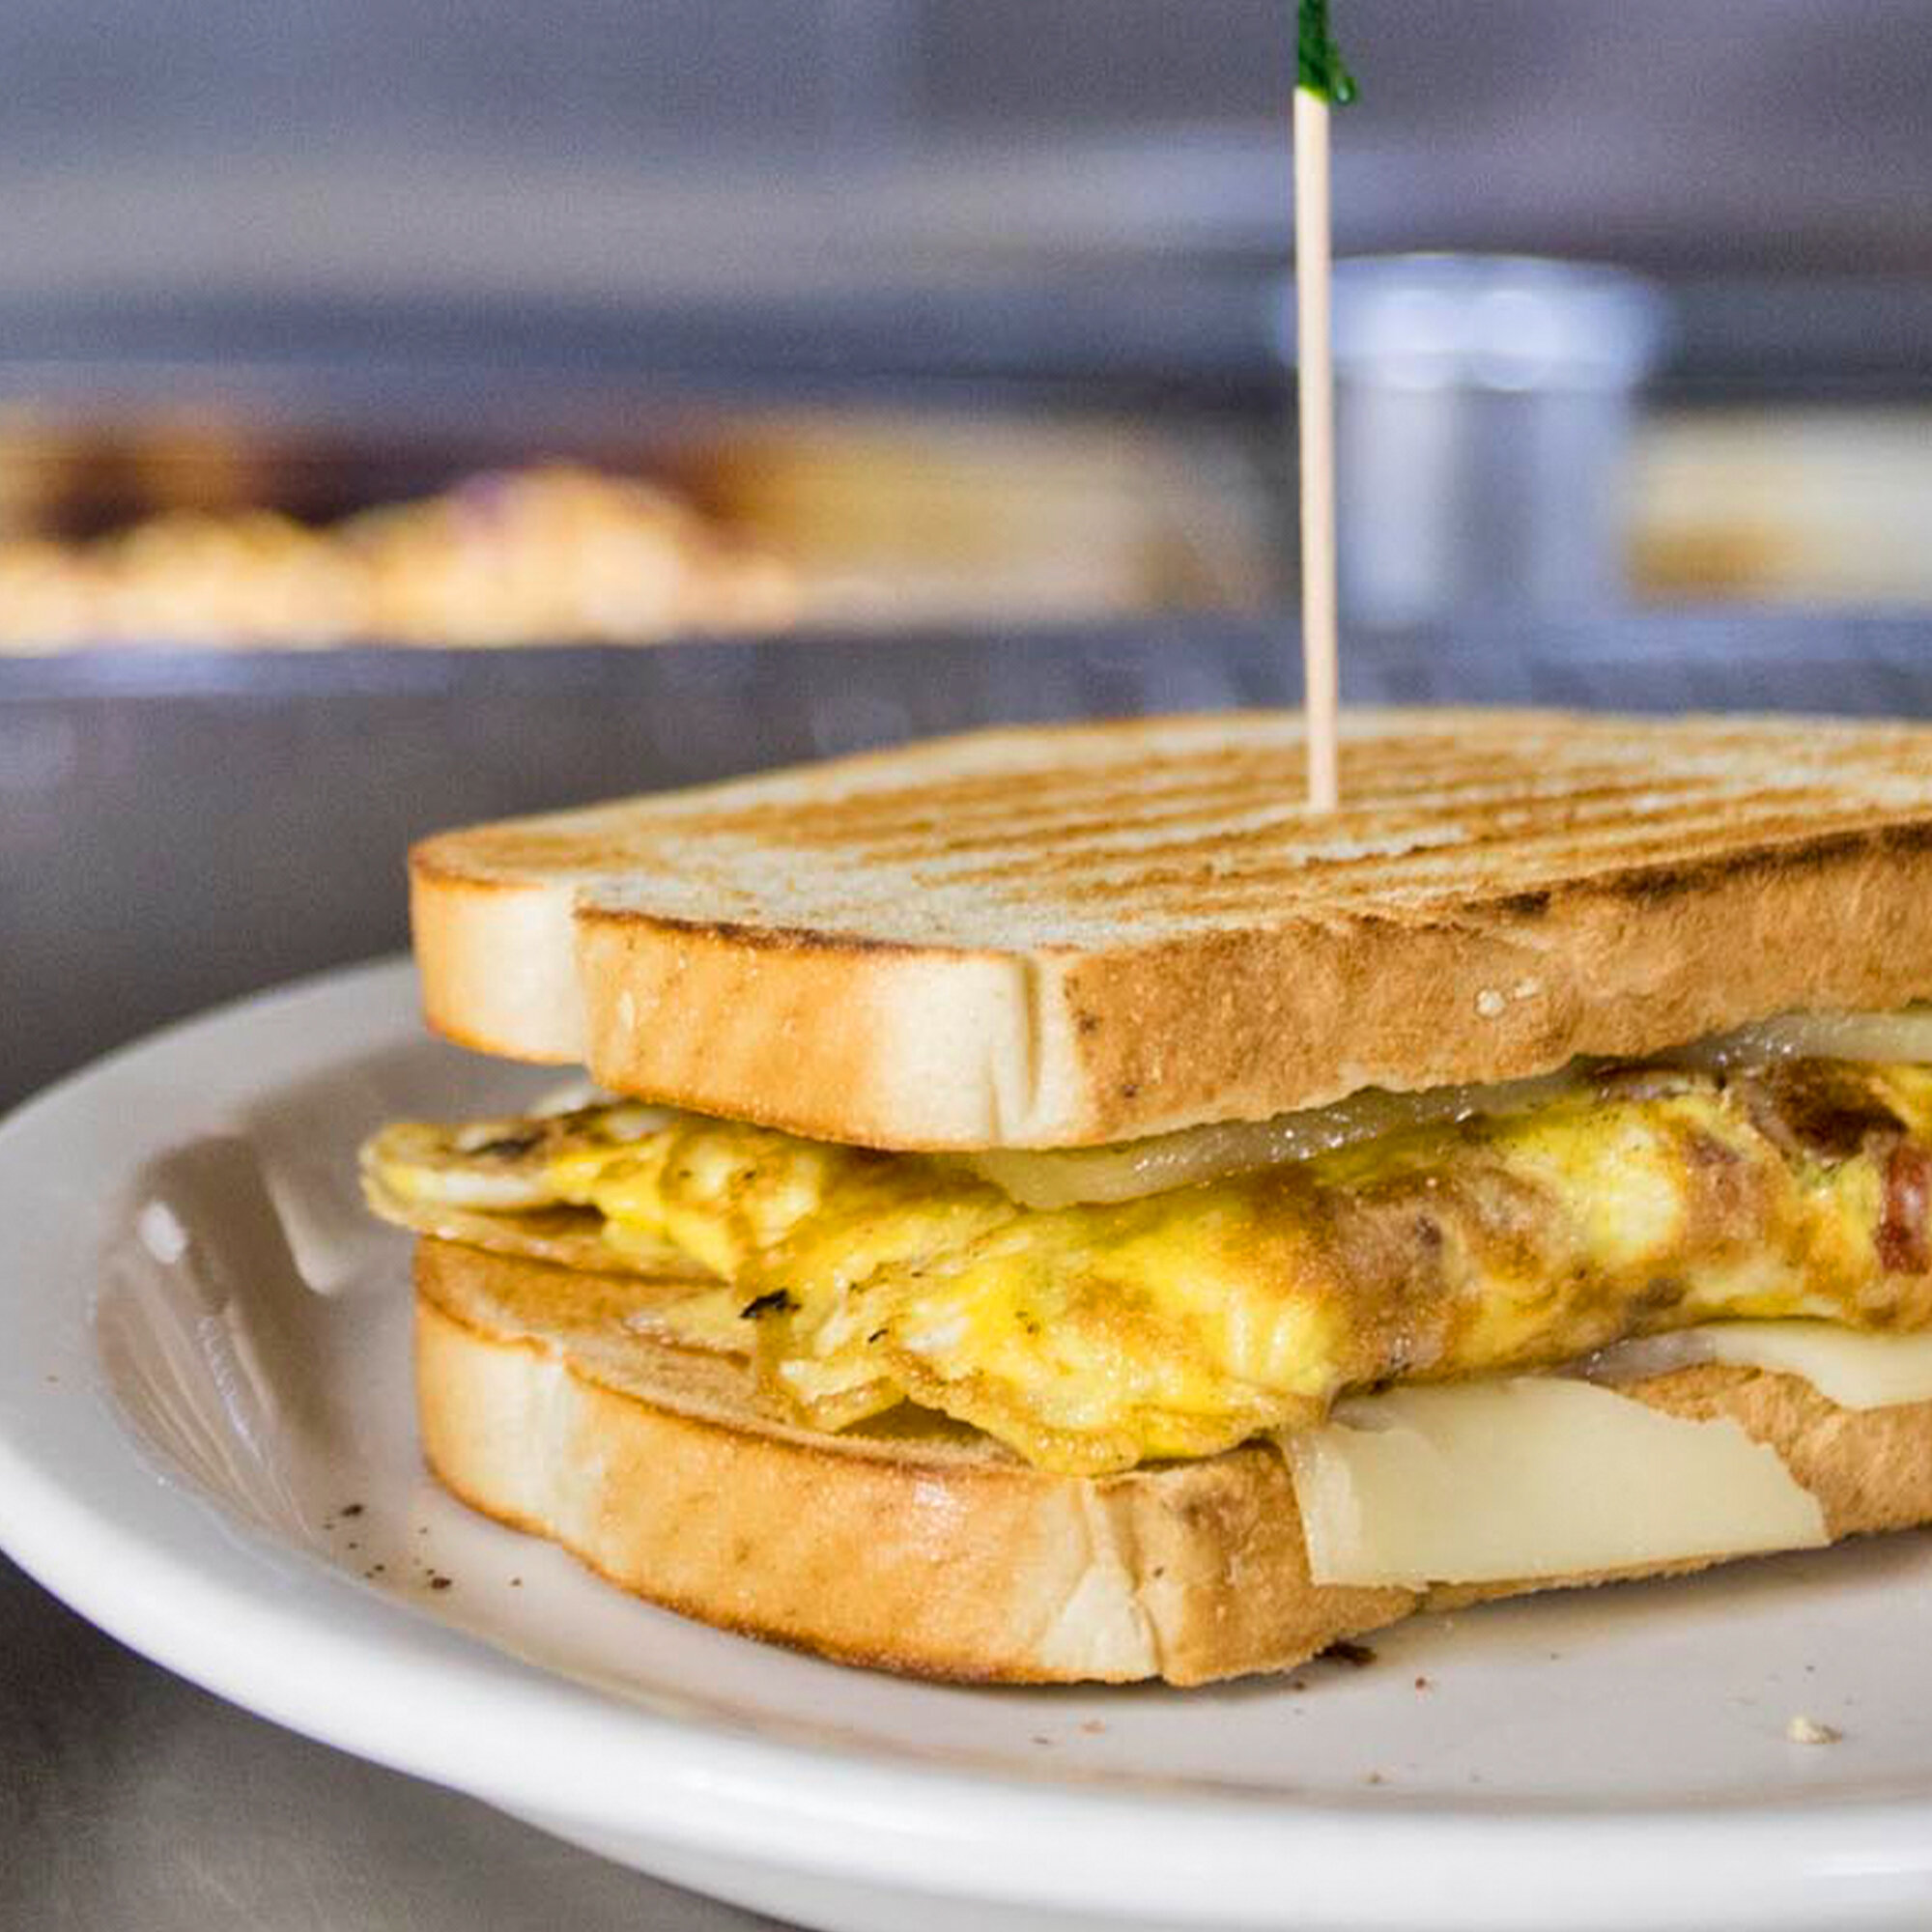  grilled egg and cheese breakfast sandwich on a plate 